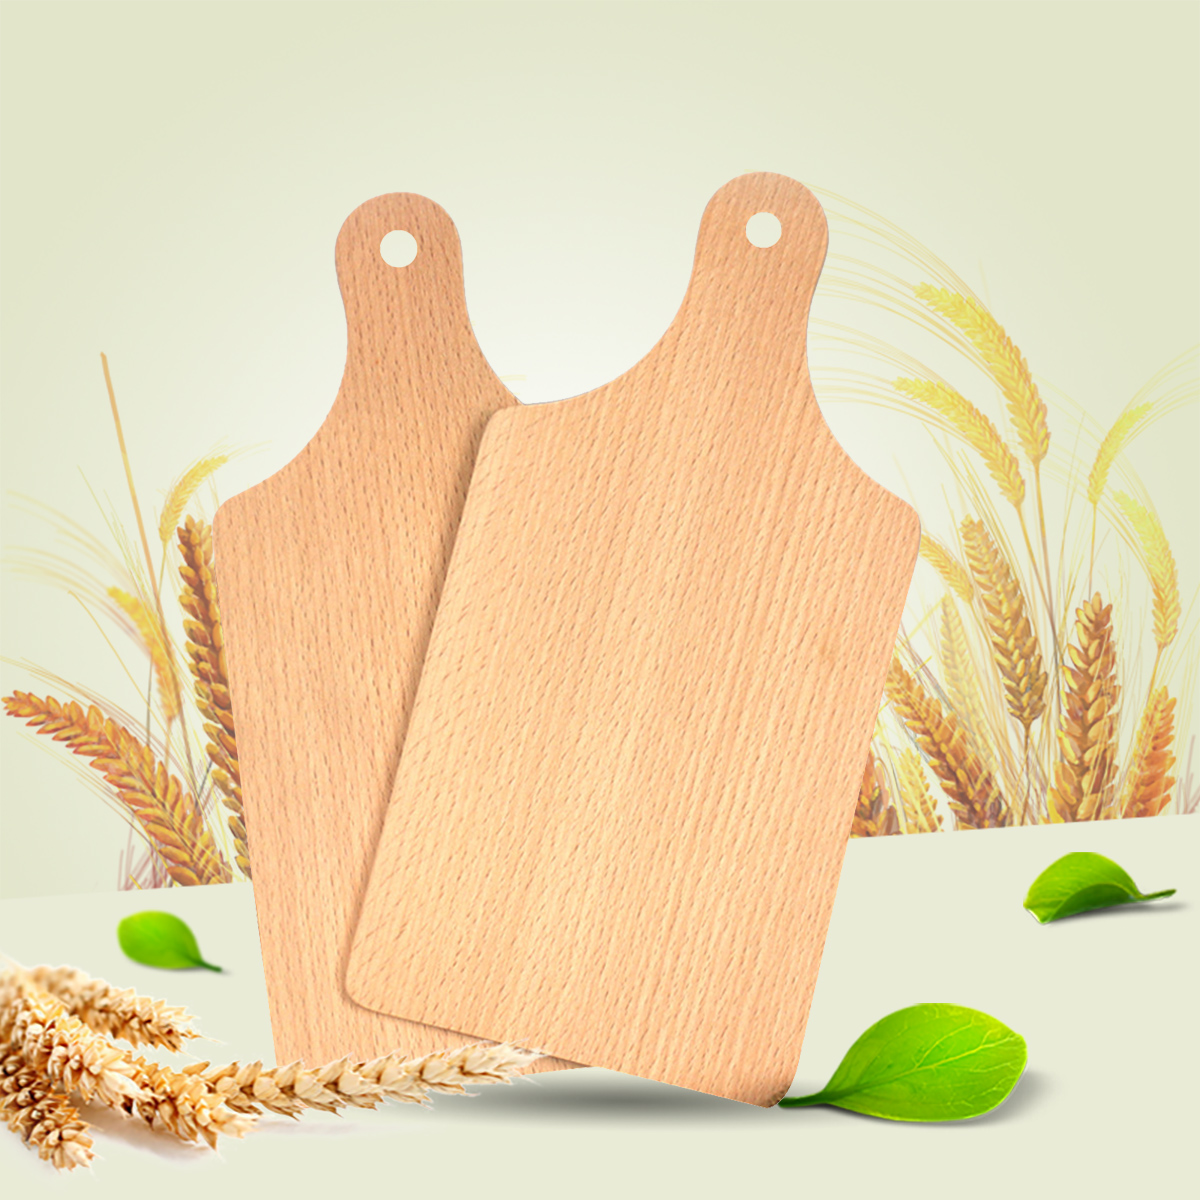 Solid Wood Cutting Board with Handle Overturnable Smooth and Firm Rectangular Hardwood Cutting Board for Kitchen Dish